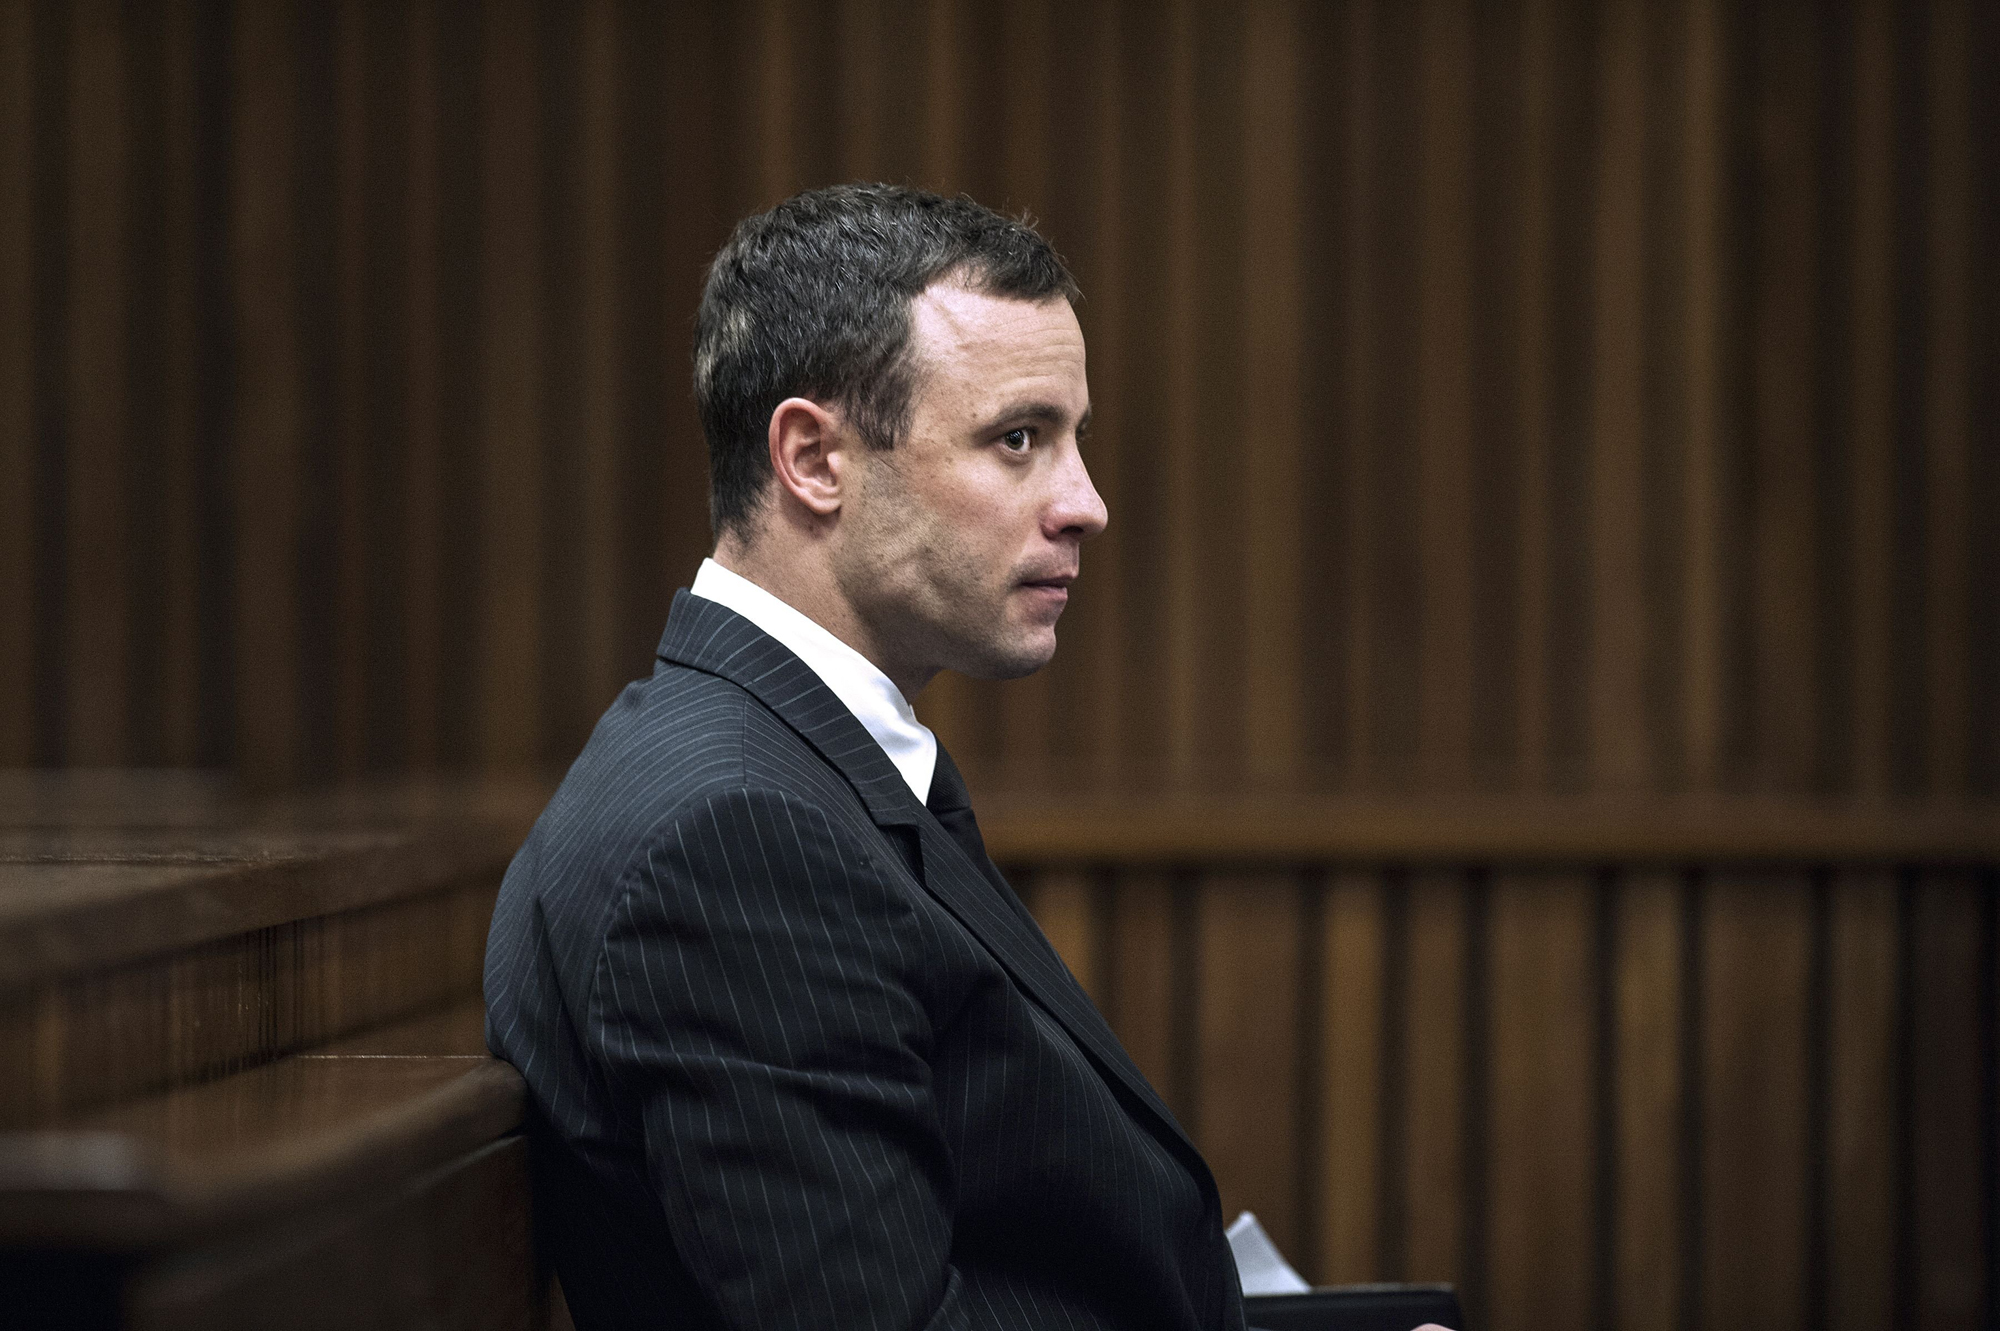 Paralympian Oscar Pistorius sits in the dock during his murder trial at the High Court in Pretoria, on July 2, 2014.